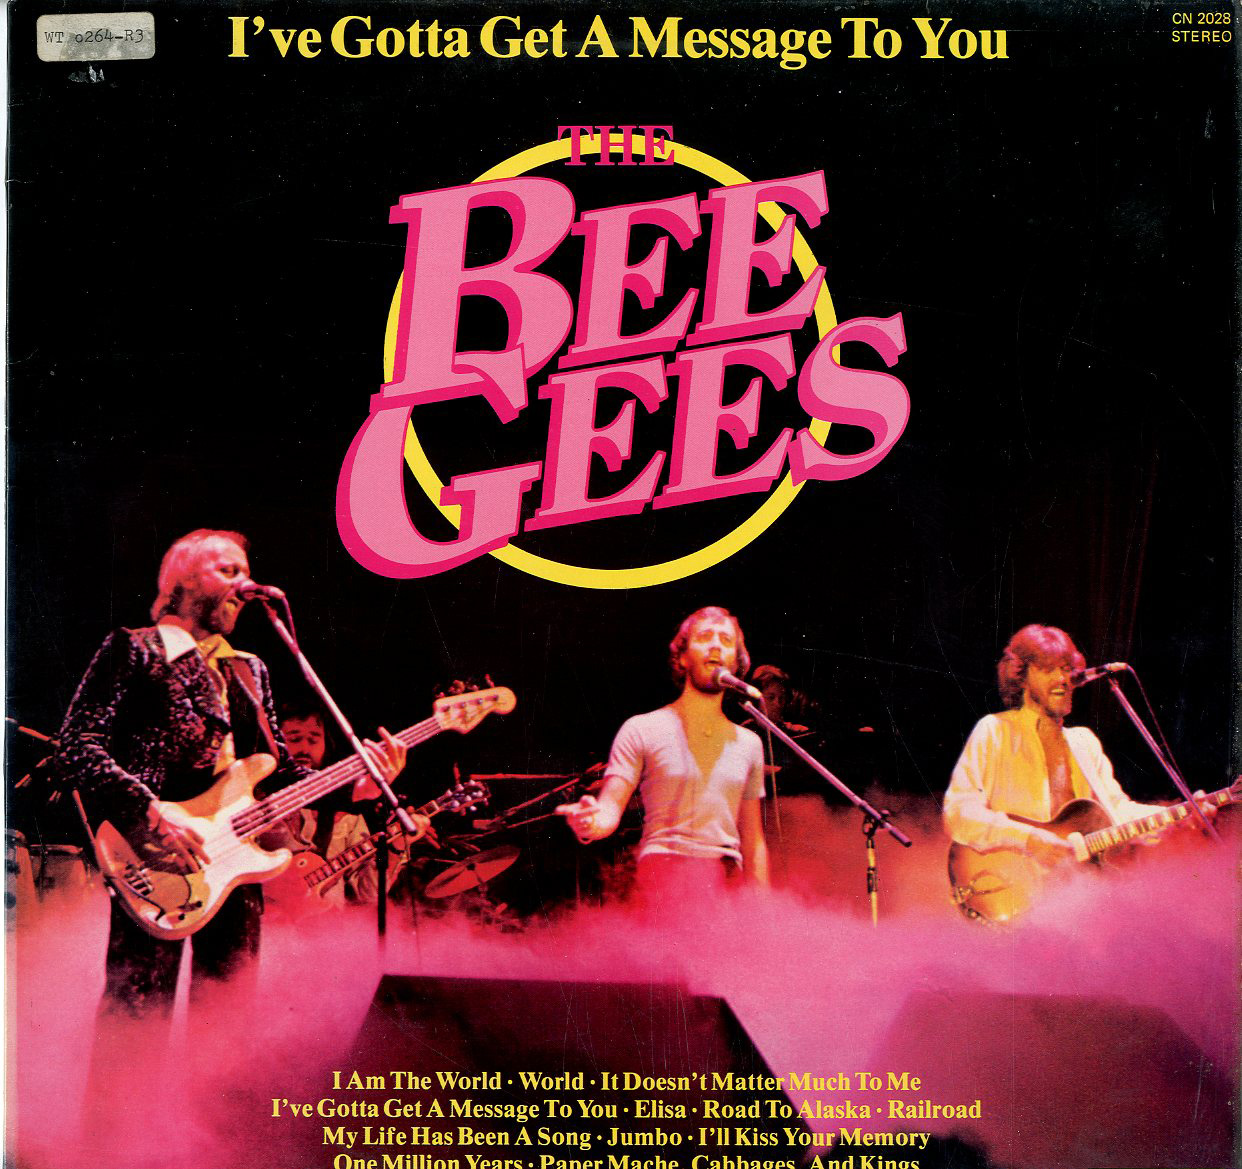 Albumcover The Bee Gees - Ive Gotta Get a Message To You sowie Word,, Railroad, One Million Years, Elisa u.a. (1965 bis 1977uk